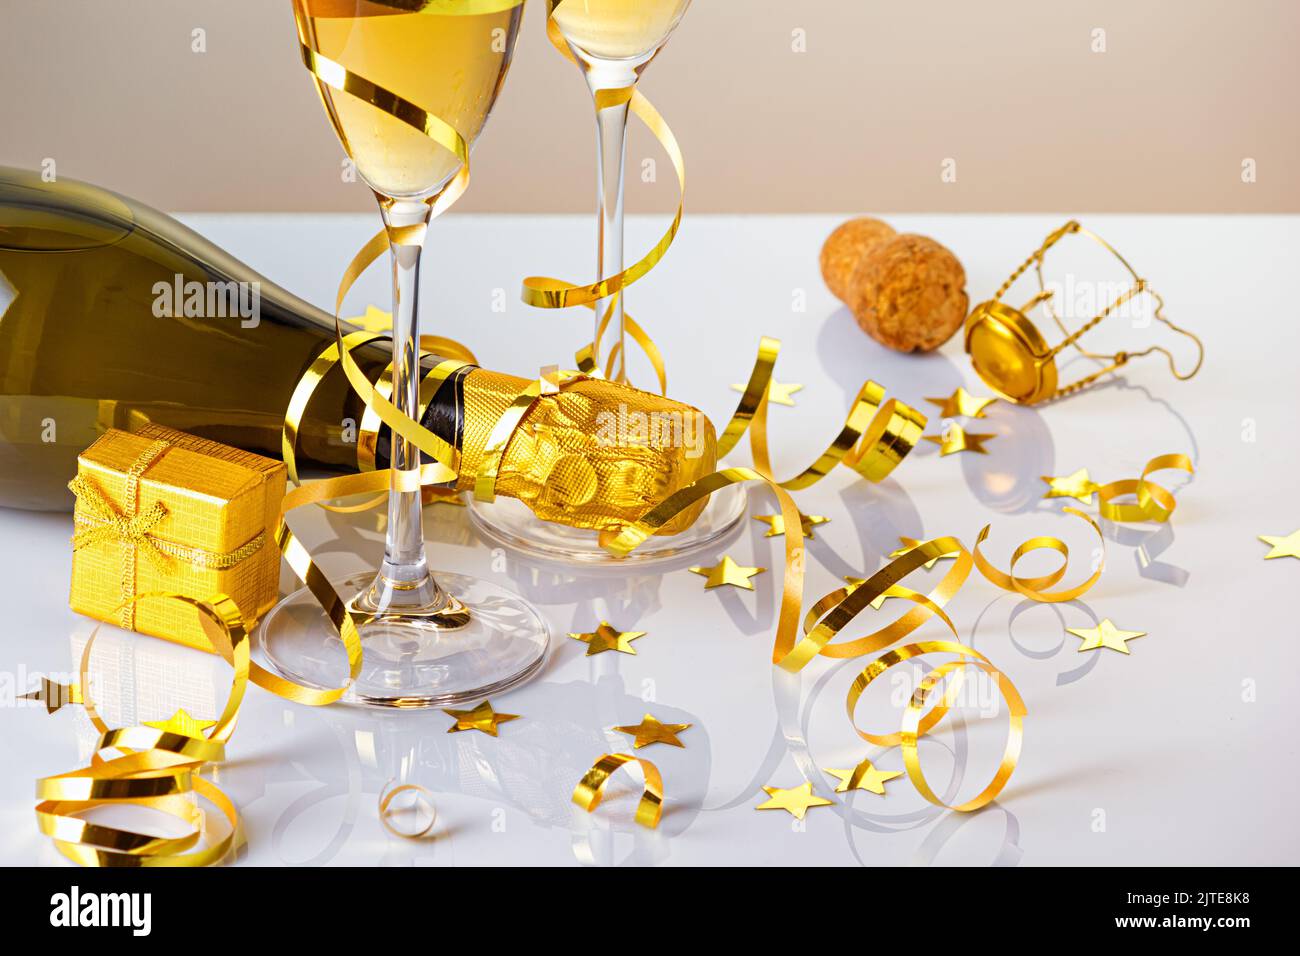 Two glasses of champagne with bottle, golden serpentine and a gift on a glossy surface. Selective focus Stock Photo